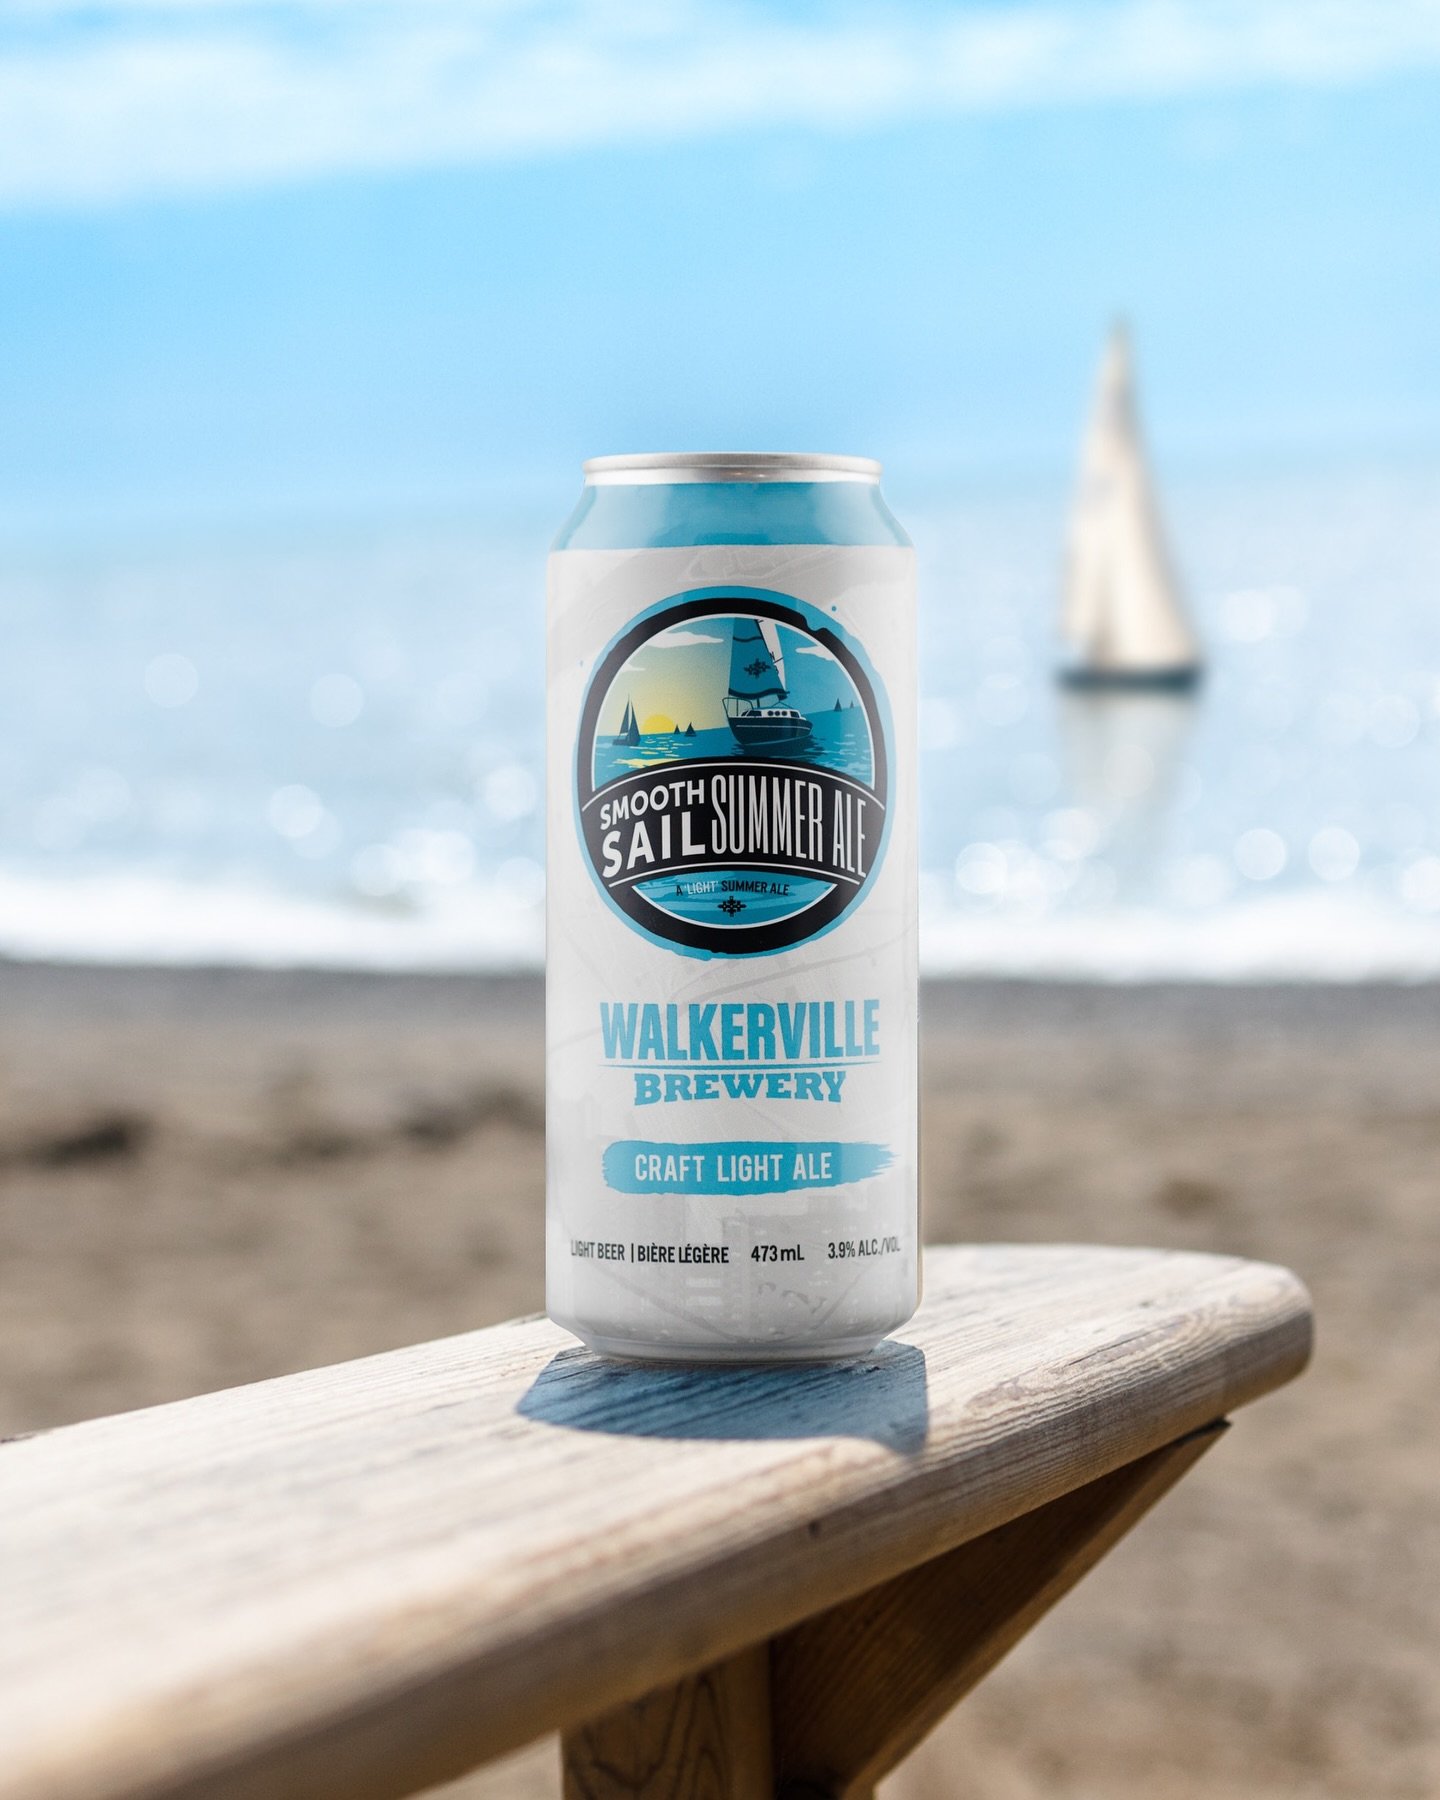 Summer must be right around the corner, because...Smooth Sail Summer Ale is returning to the brewery on Friday, May 17th! ⛵

A light and refreshing summer ale that is sure to please the palate. At an easy 3.9% ABV, this light pale ale features a deli